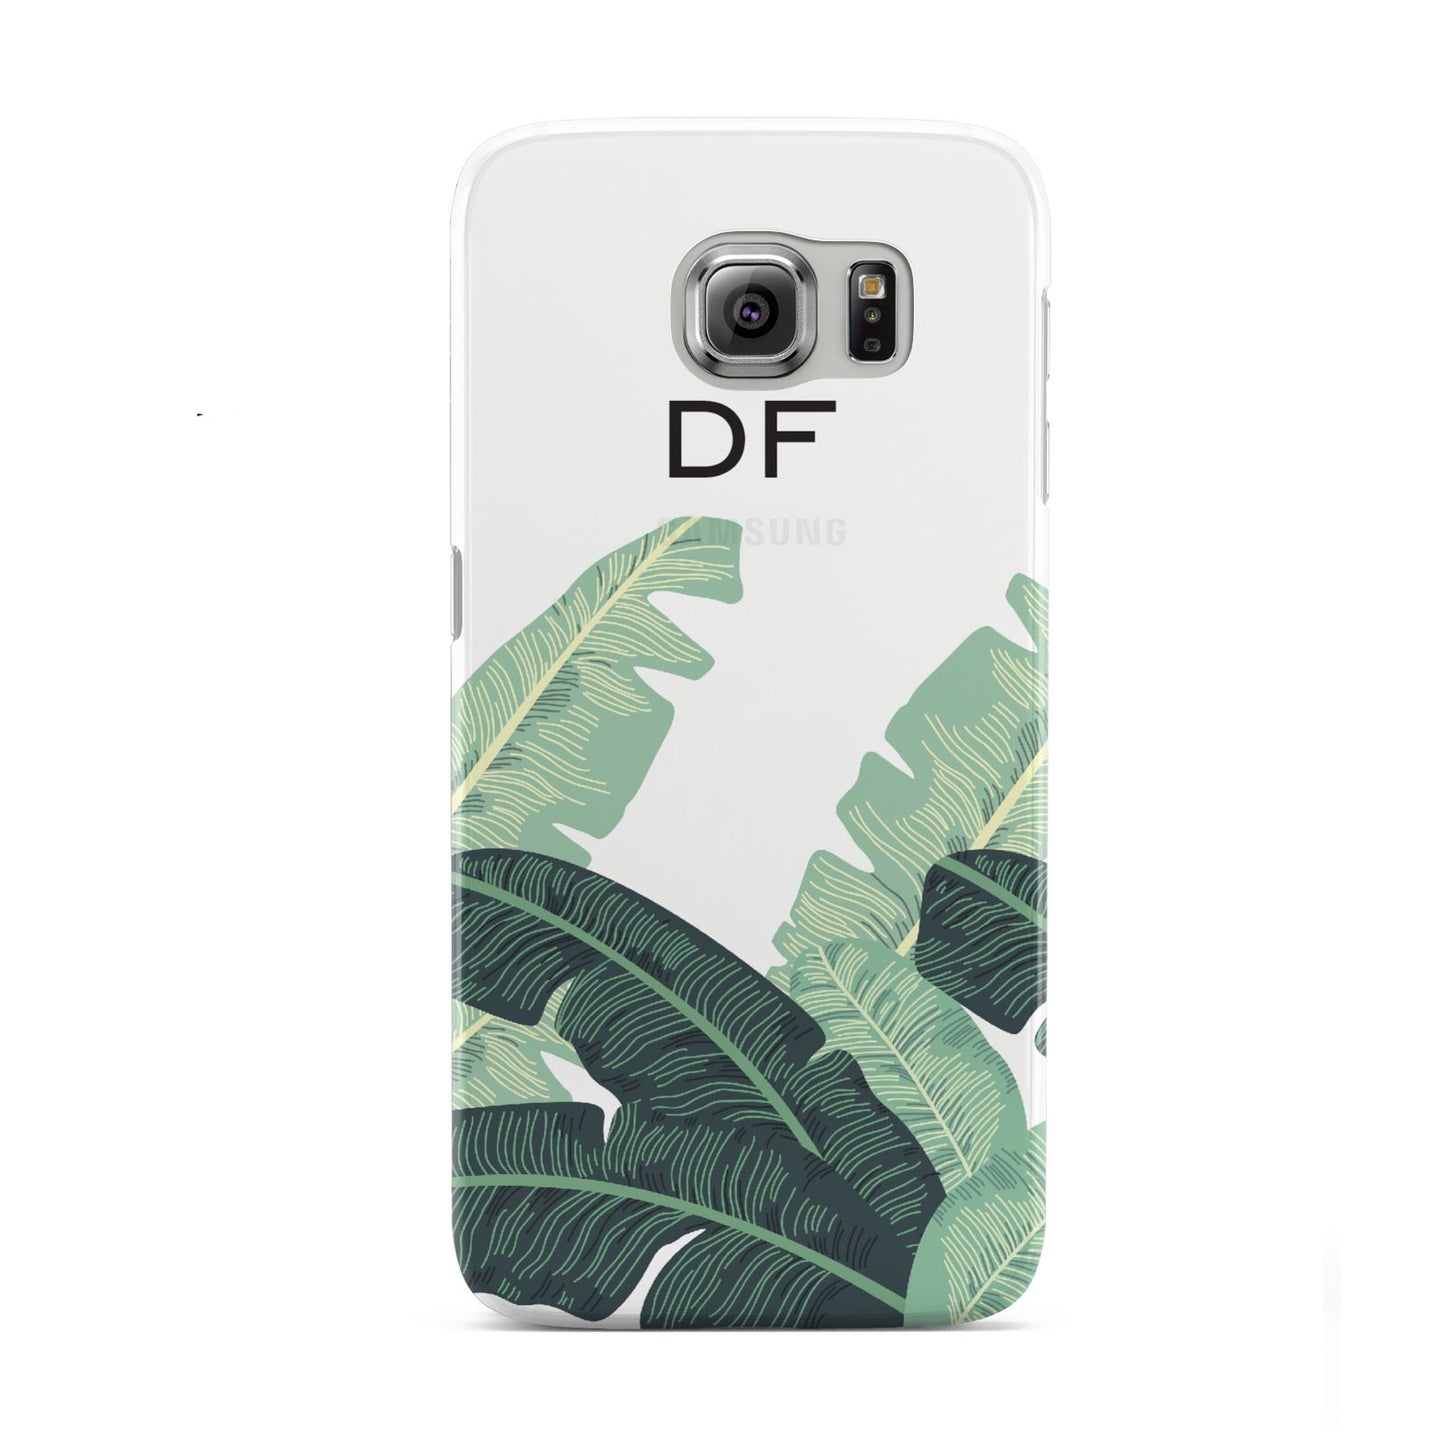 Personalised White Banana Leaf Samsung Galaxy S6 Case